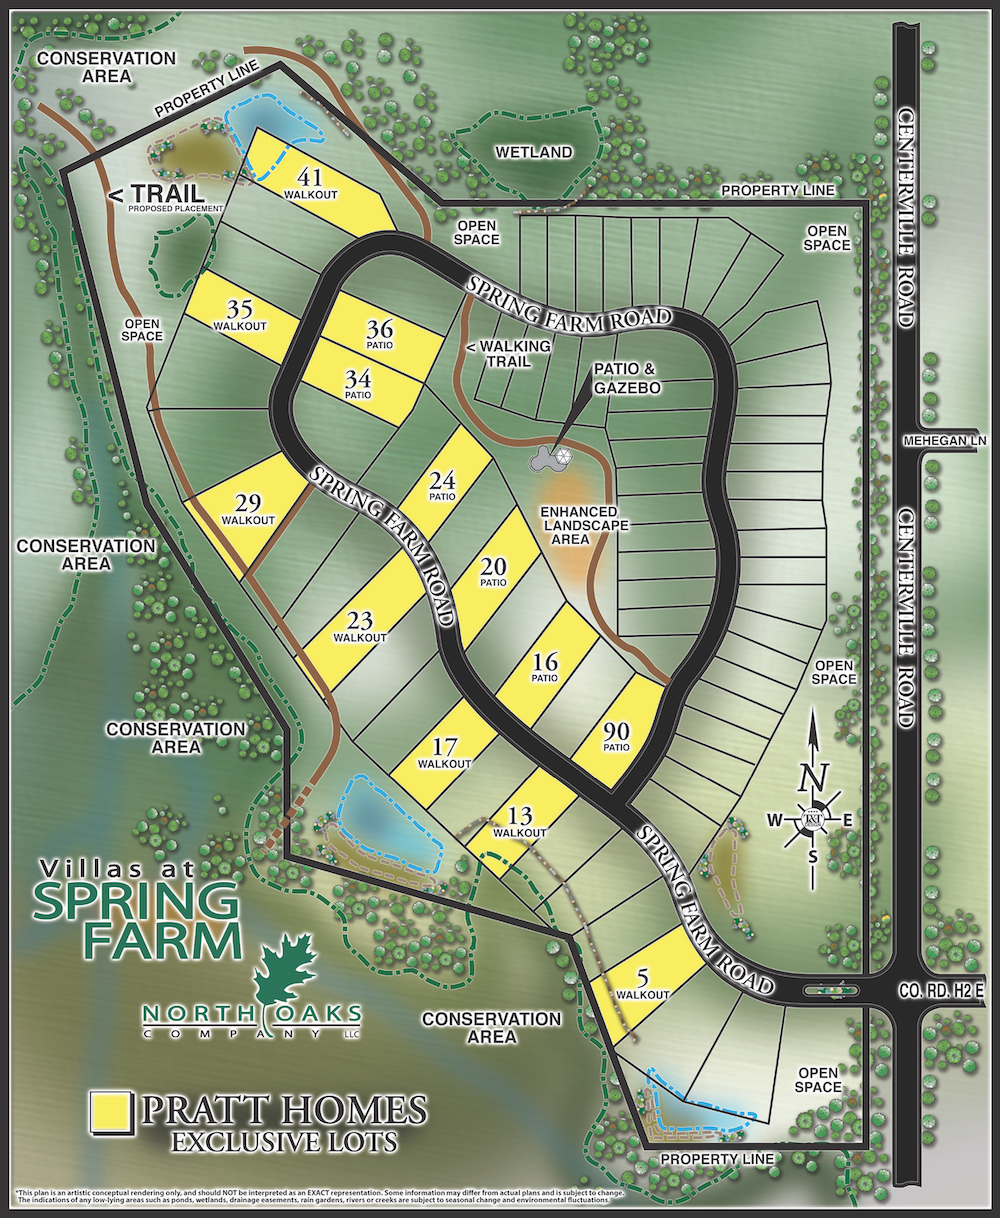 Available lots at Spring Farm North Oaks